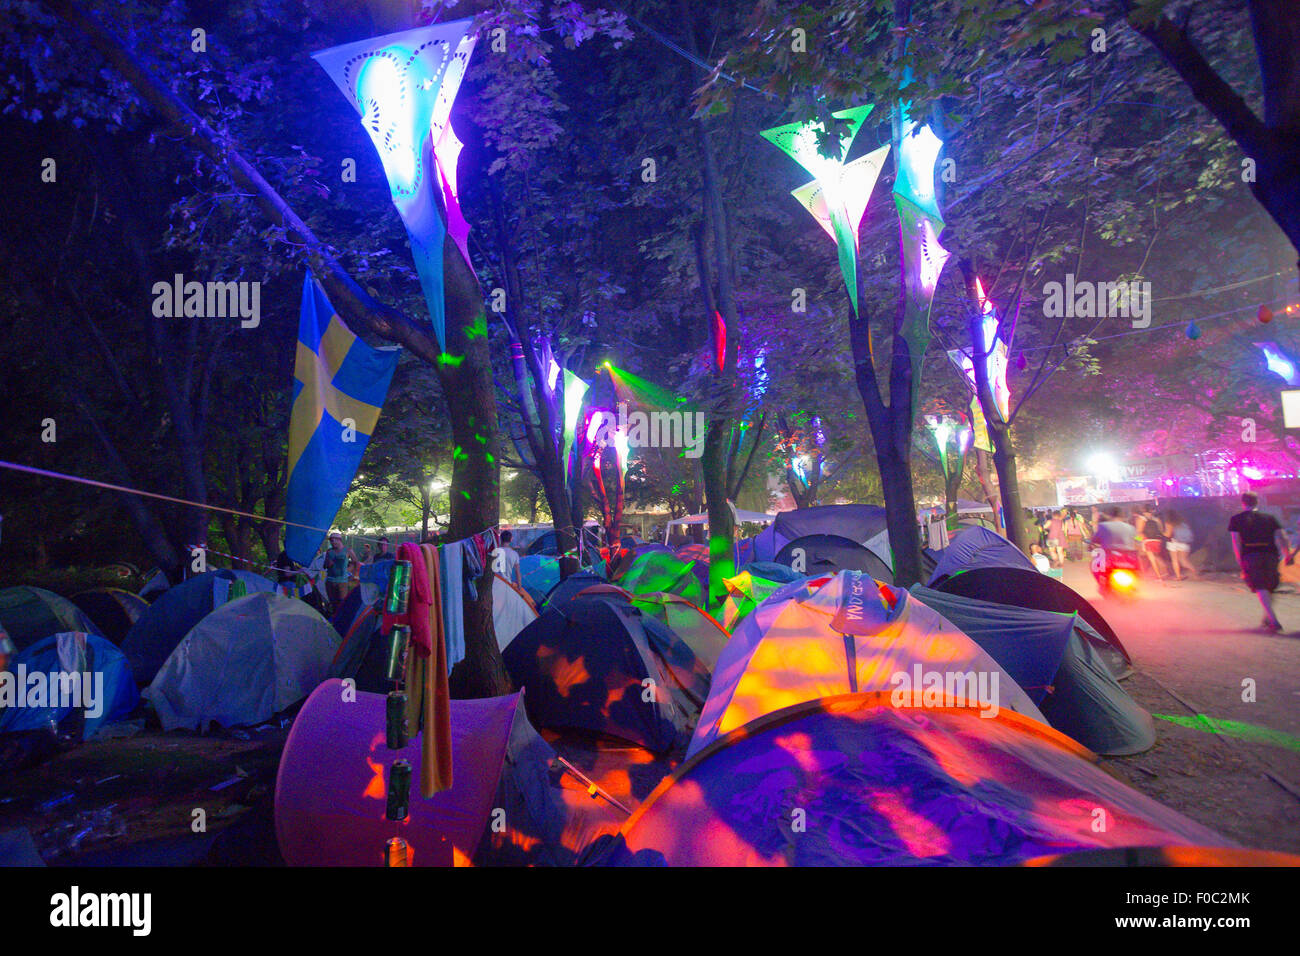 Budapest. 11th Aug, 2015. The tents of festival goers are illuminated by colourful lights during the Sziget (Hungarian for 'Island') Festival on the Obuda Island in Budapest, Hungary on Aug. 11, 2015. The 23rd Sziget Festival held from Aug. 10 to 17 is one of the largest music festivals in Europe. Credit:  Attila Volgyi/Xinhua/Alamy Live News Stock Photo